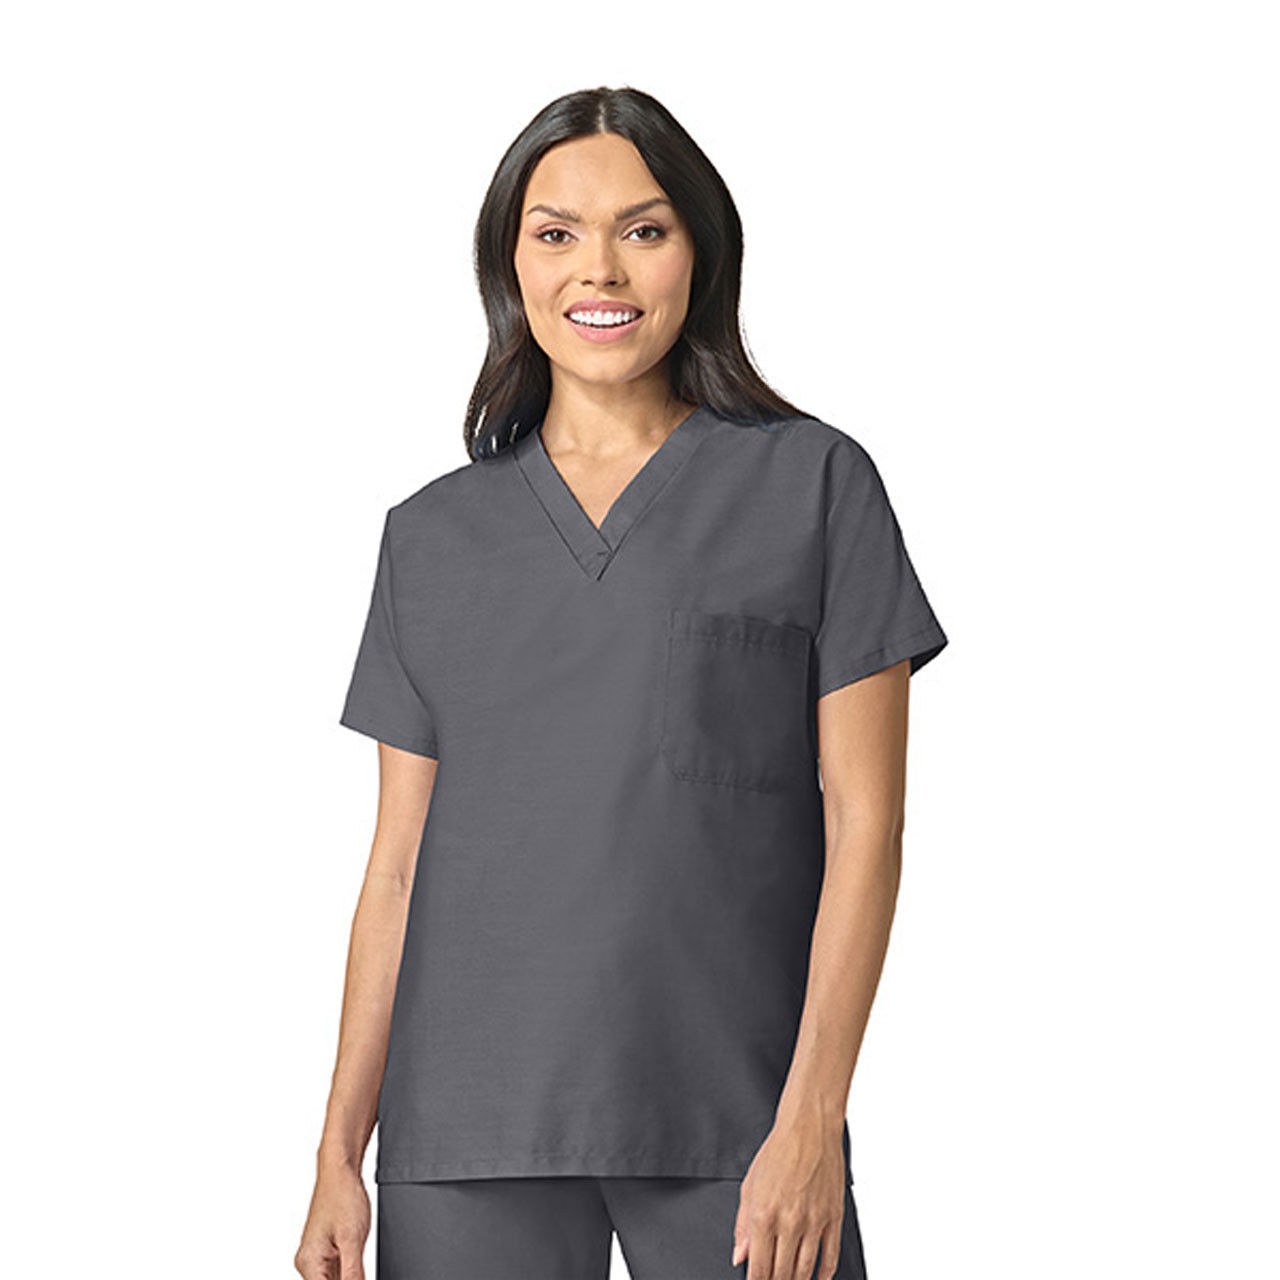 What is the color of the Pewter Gray Scrub Top?